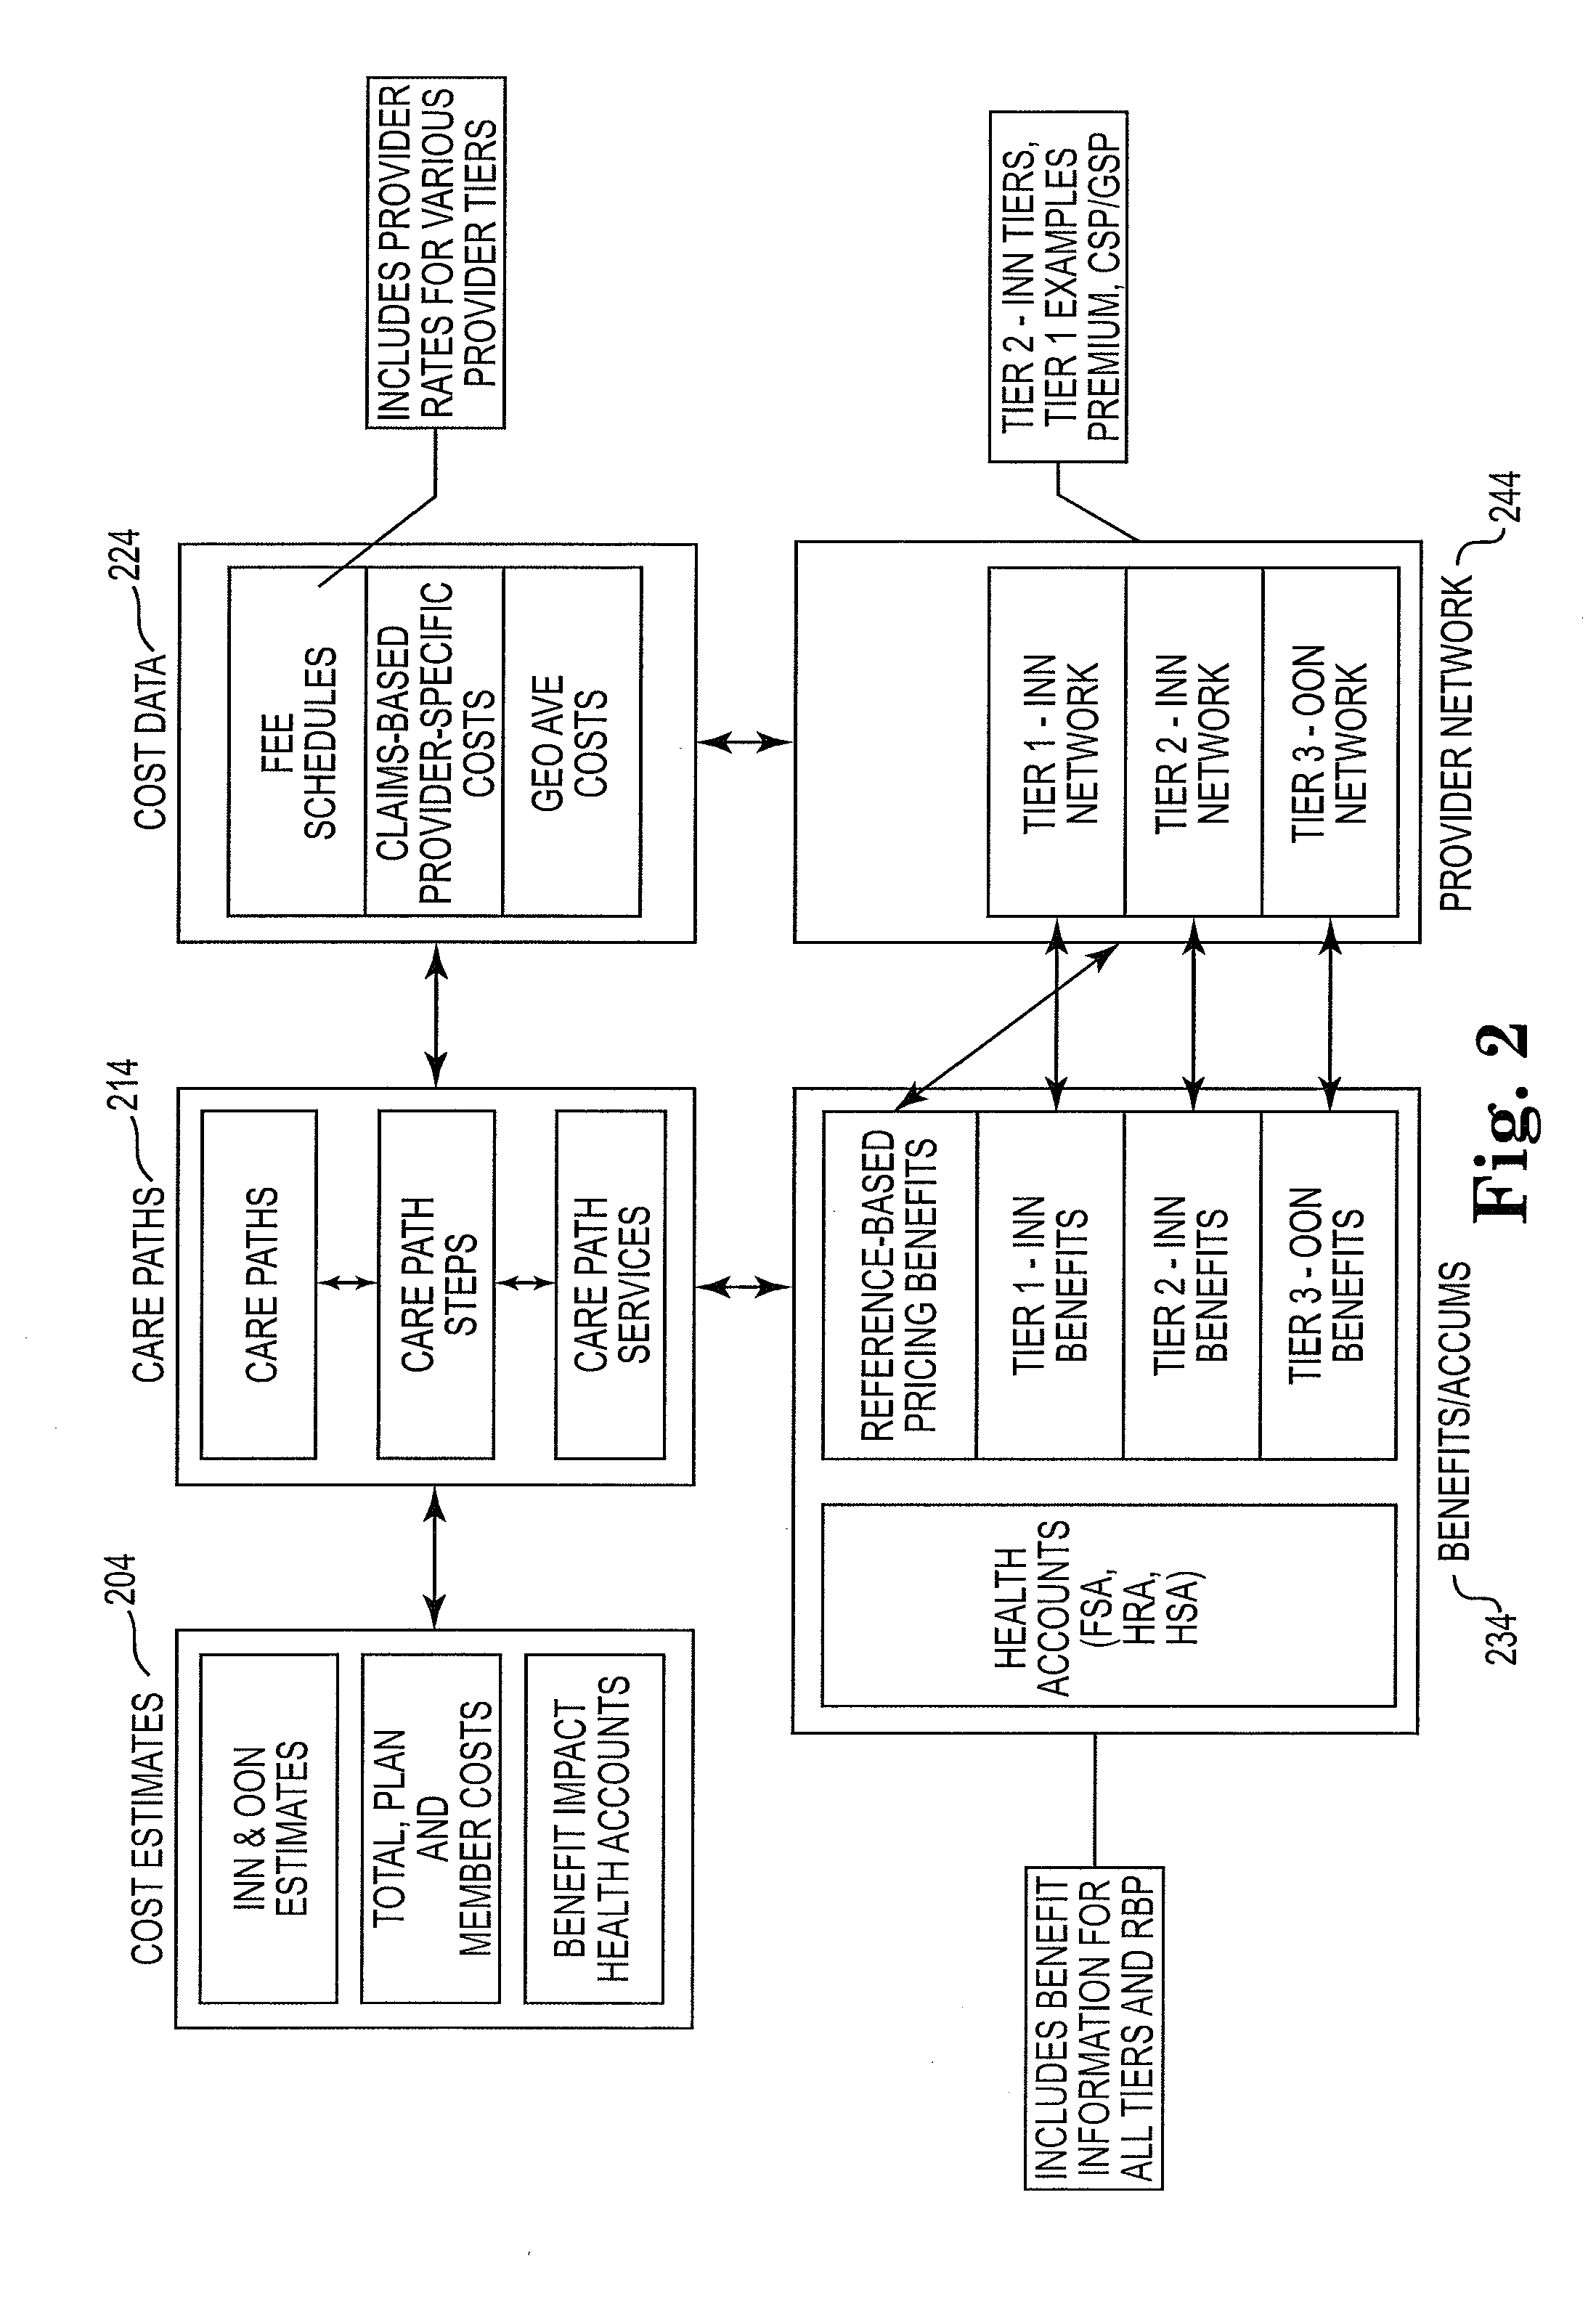 System, method and computer program product for customer-selected care path for treatment of a medical condition